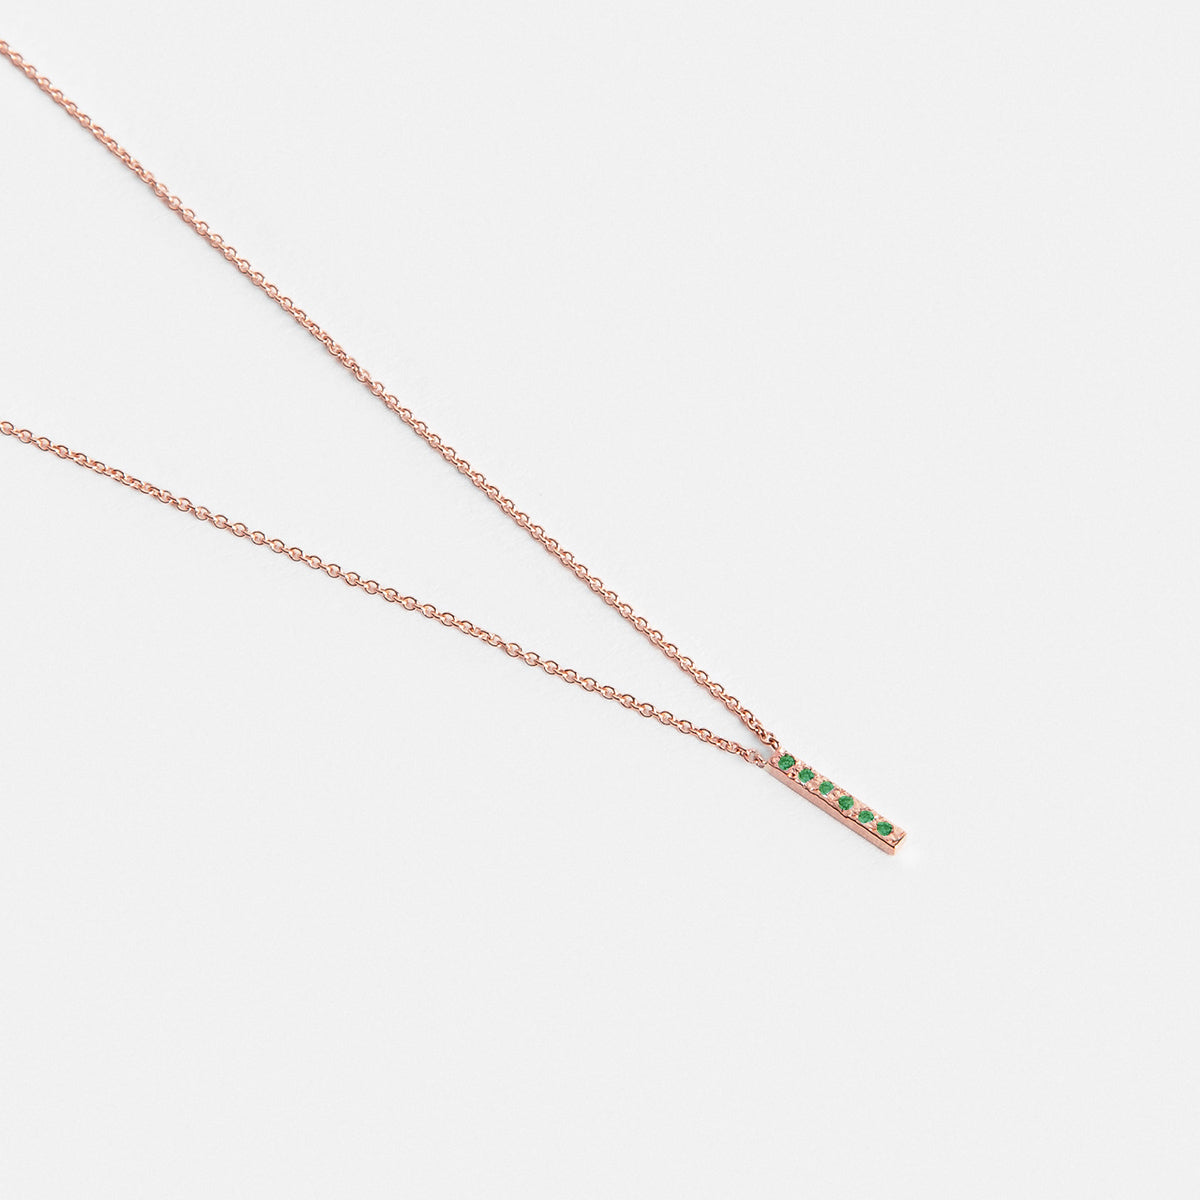 Mini Tiru Handmade Necklace in 14k Rose Gold set with Emeralds By SHW Fine Jewelry NYC